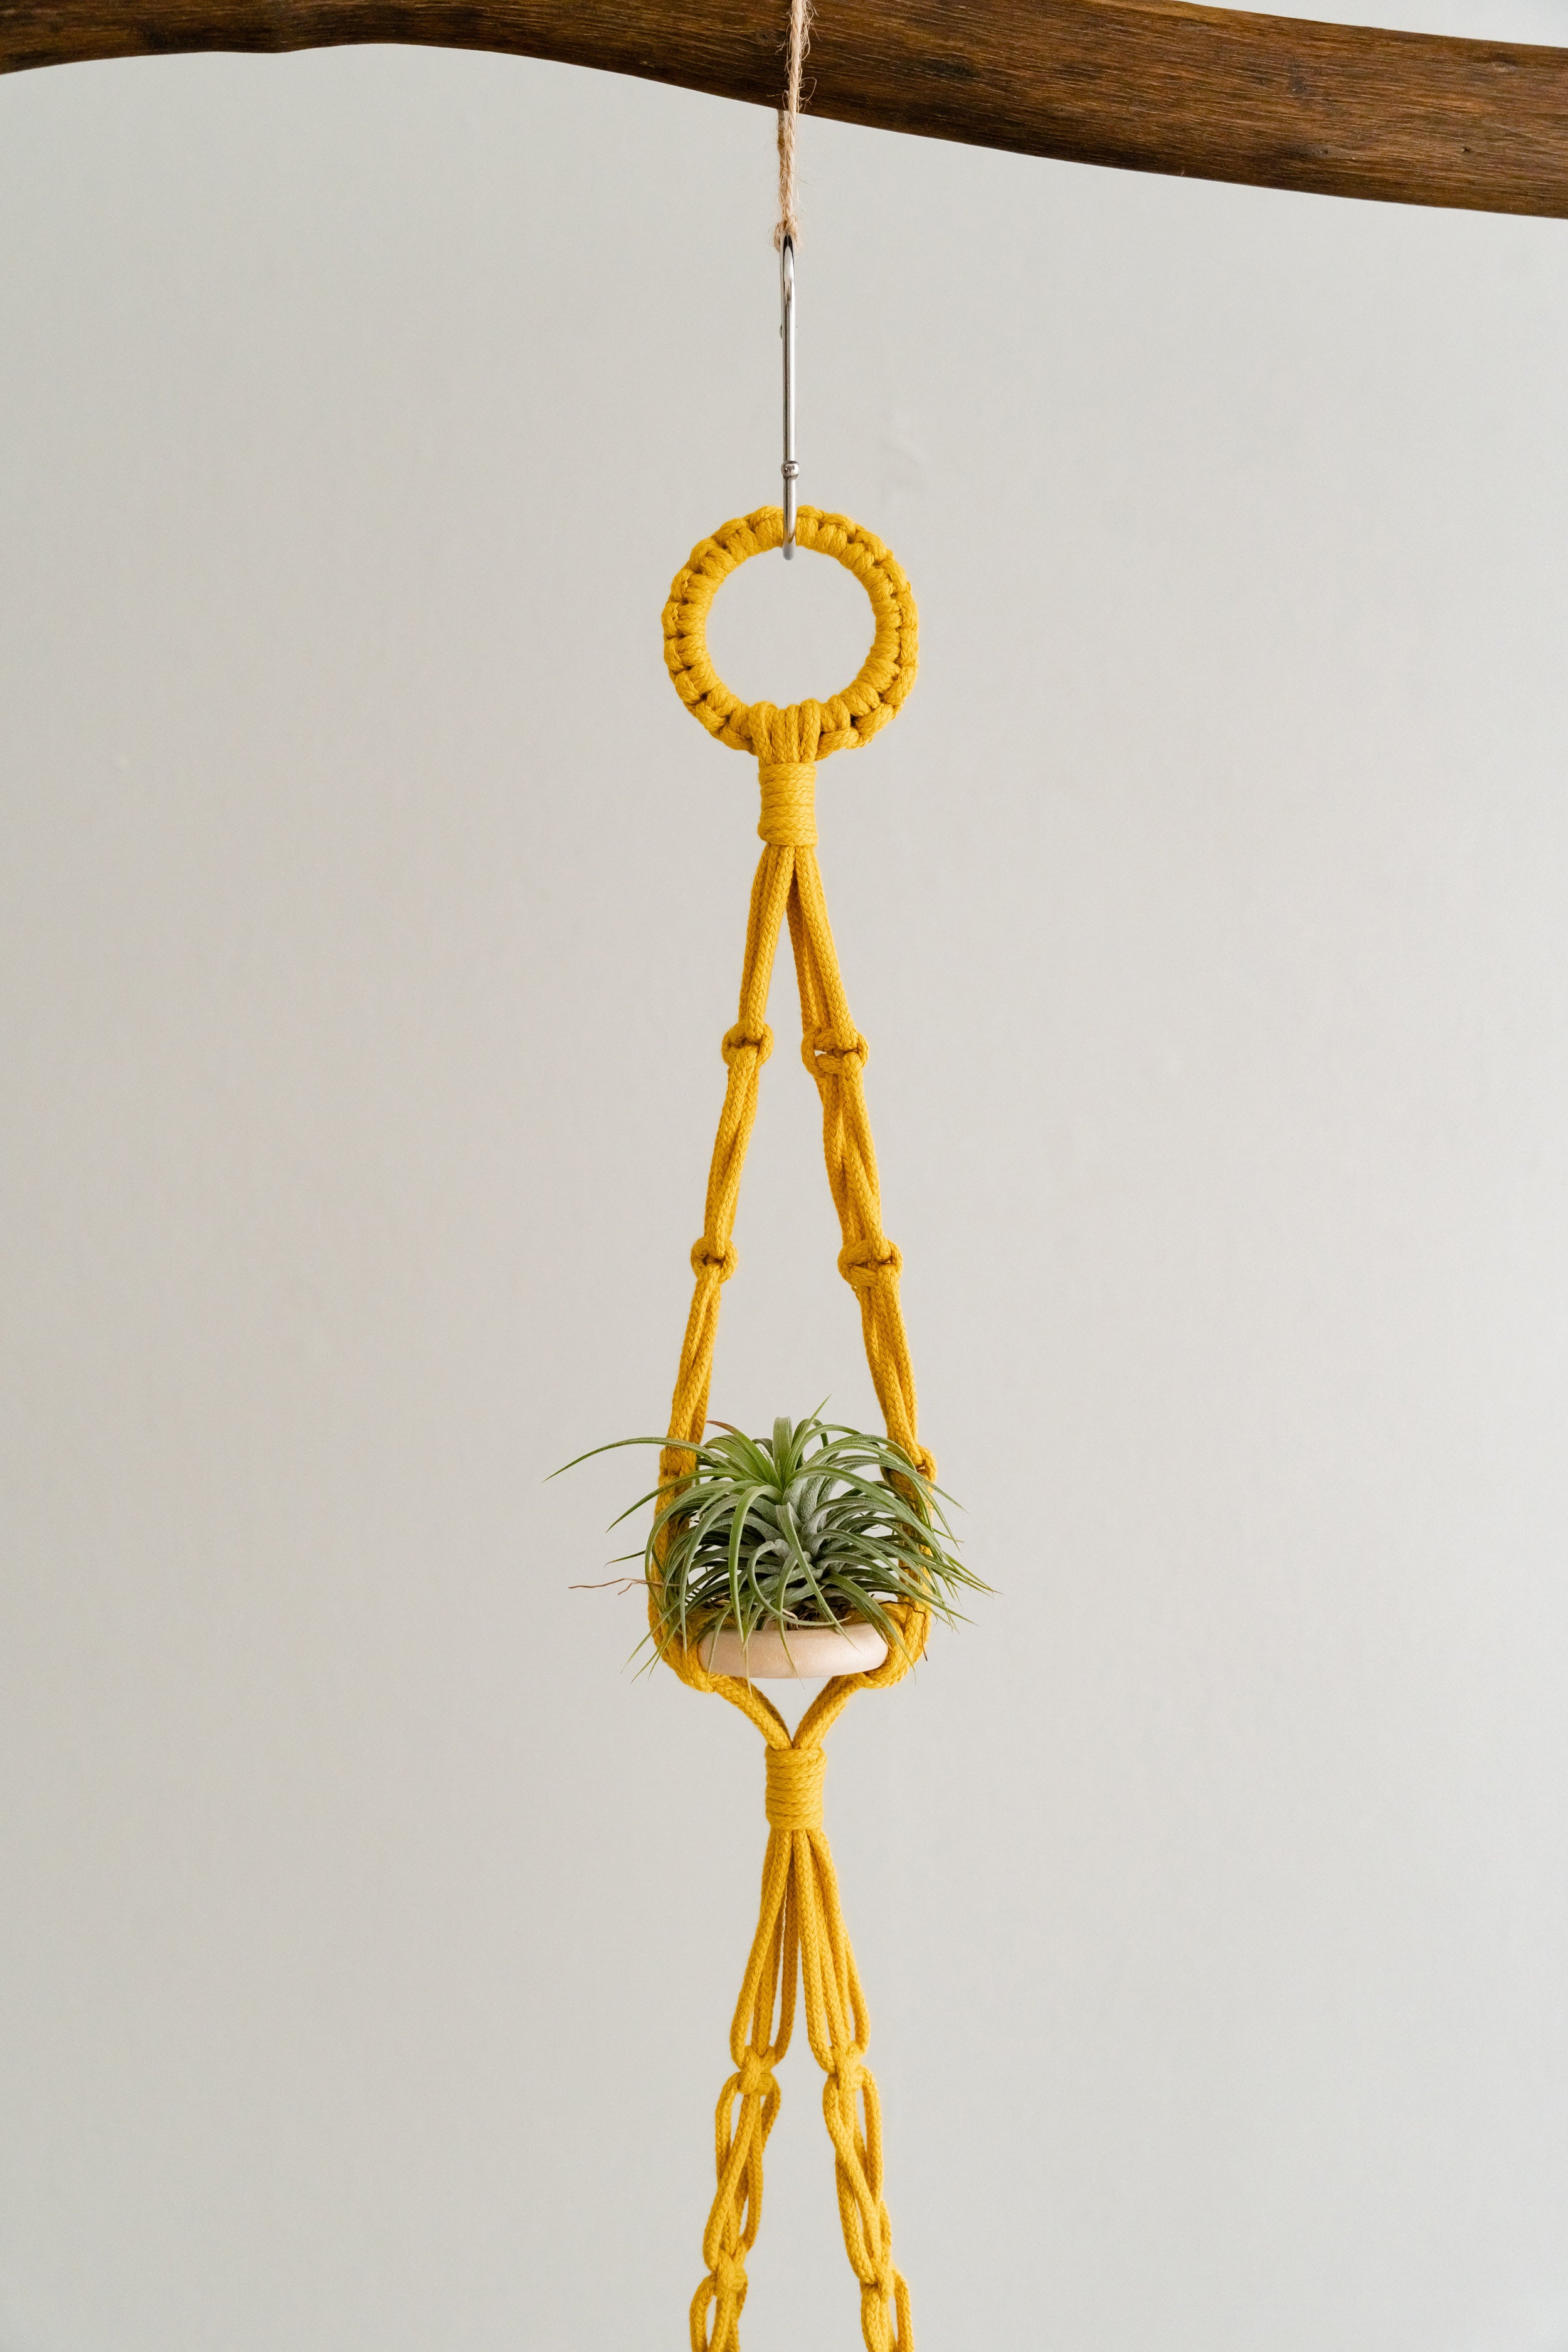 Enhance Your Space with a Macrame Double Plant Hanger for Airplants